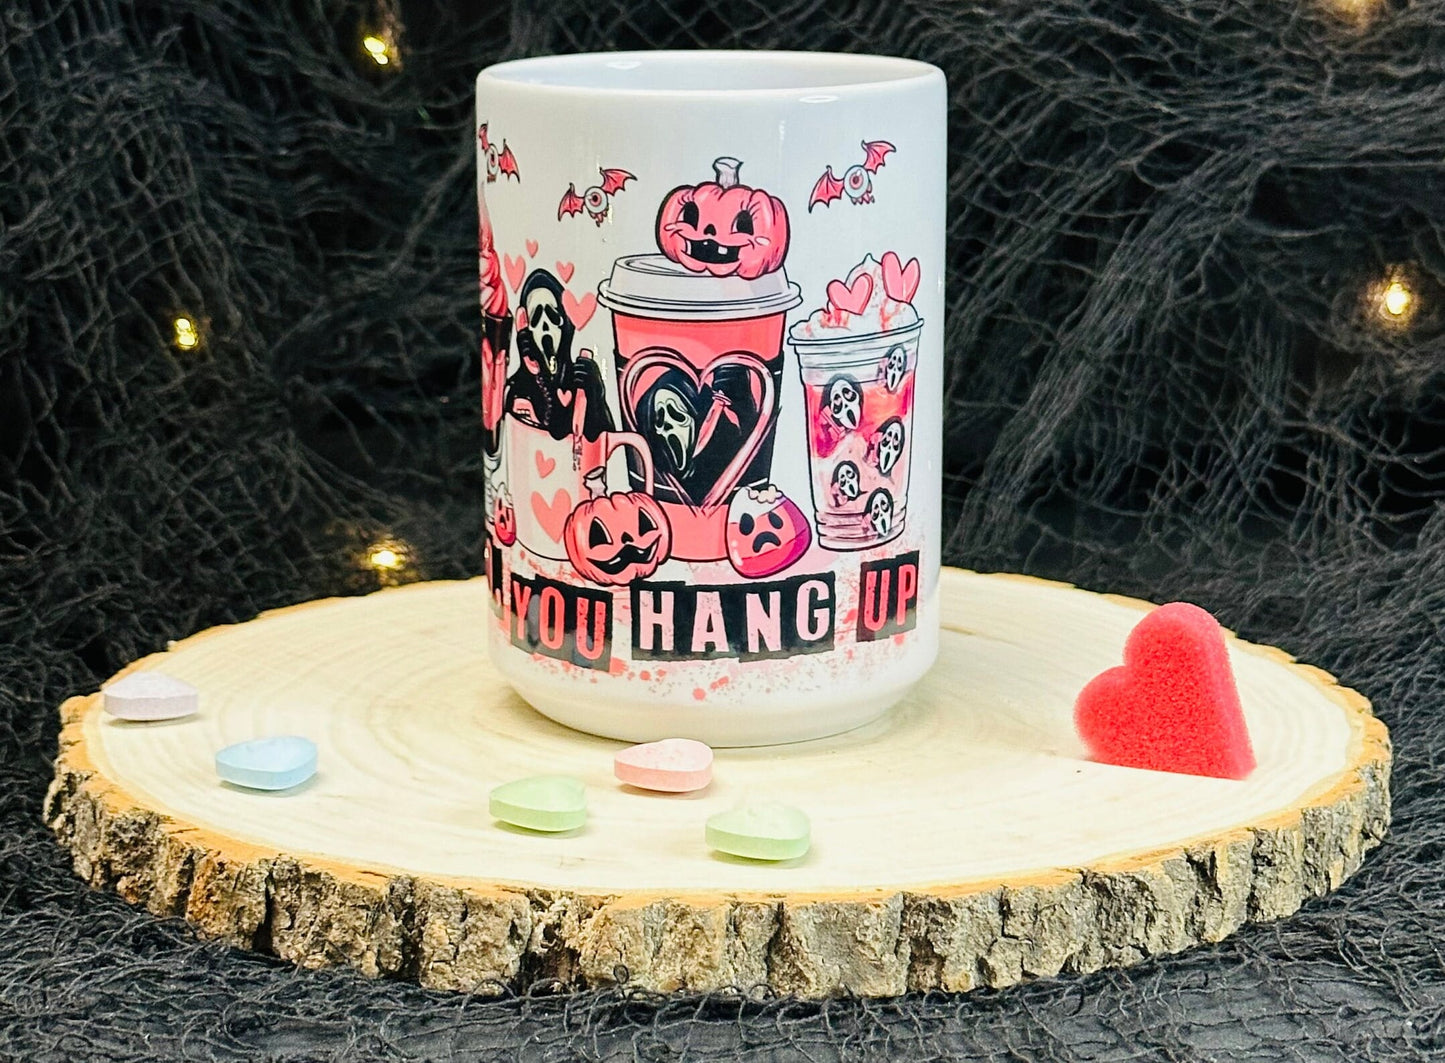 Valentines Day Spooky Mug, White Glossy Ceramic 15 oz, Anti Valentines Day, Single friend gift, Funny Halloween, Gifts for her, Creepy Goth